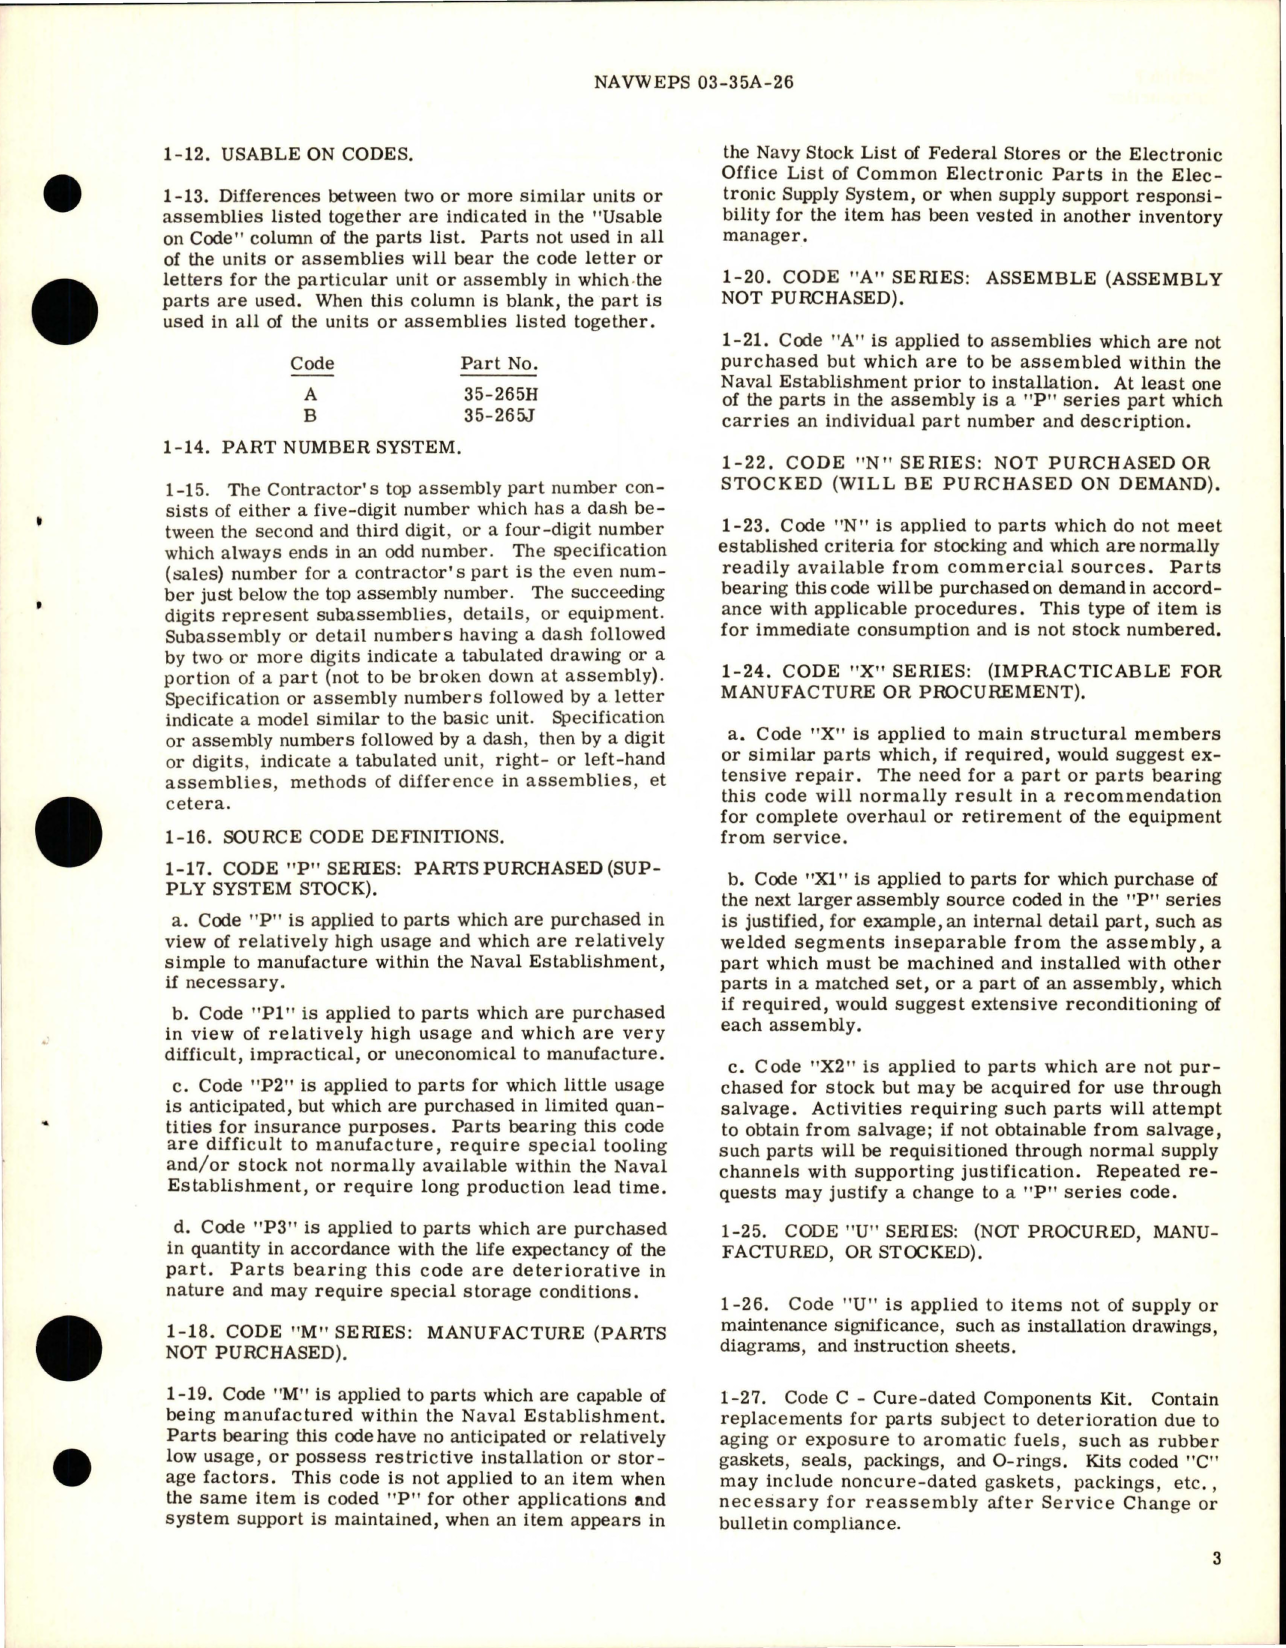 Sample page 5 from AirCorps Library document: Illustrated Parts Breakdown for Air Shutoff and Pressure Regulator Valves - Parts 35-265H, and 35-265J